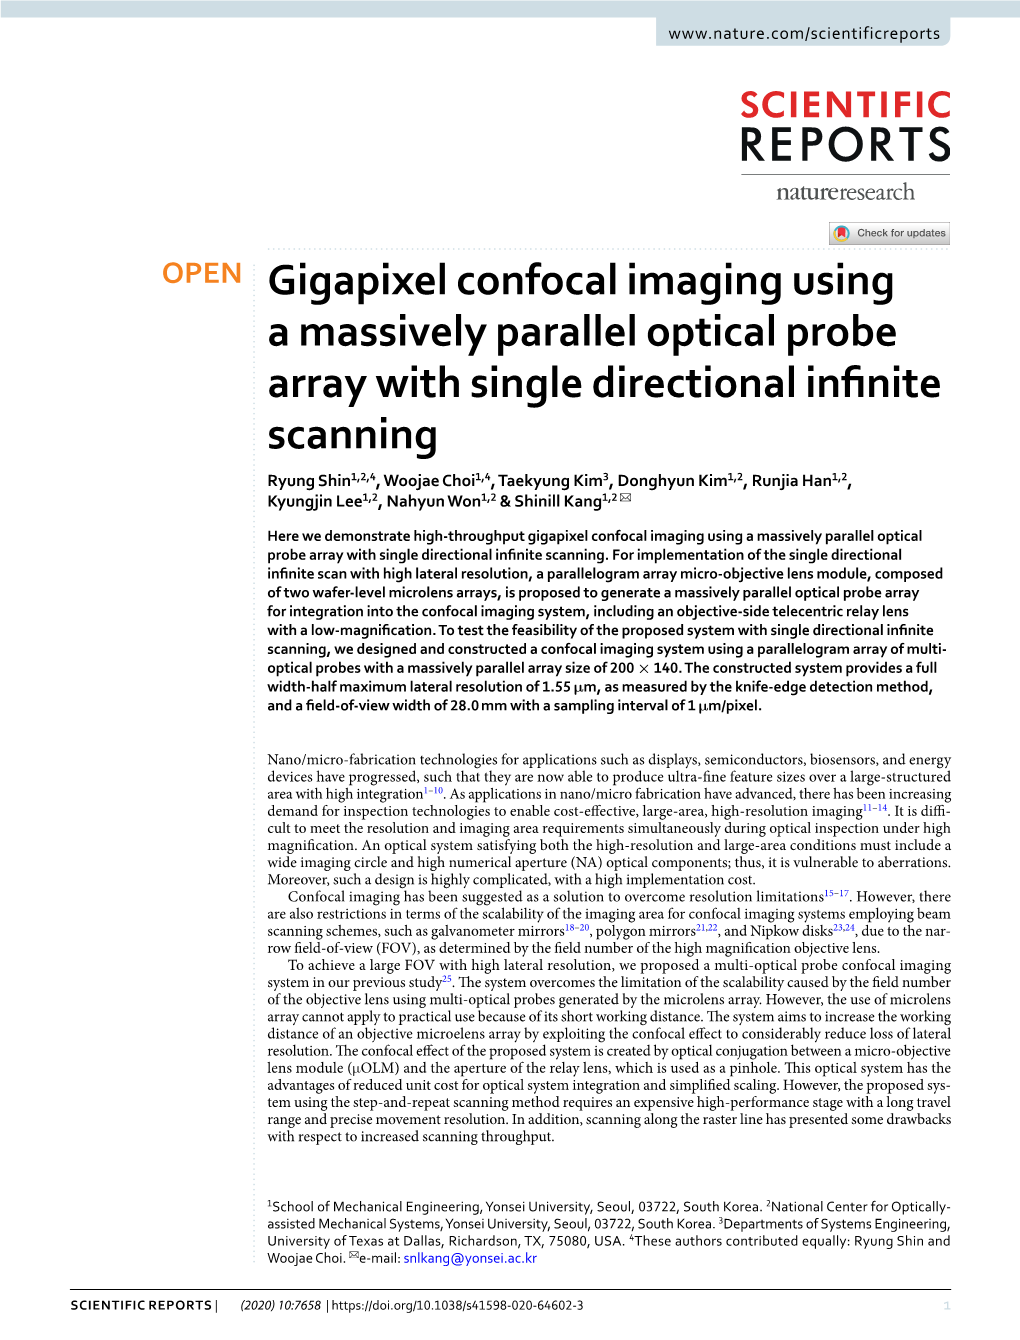 Gigapixel Confocal Imaging Using a Massively Parallel Optical Probe